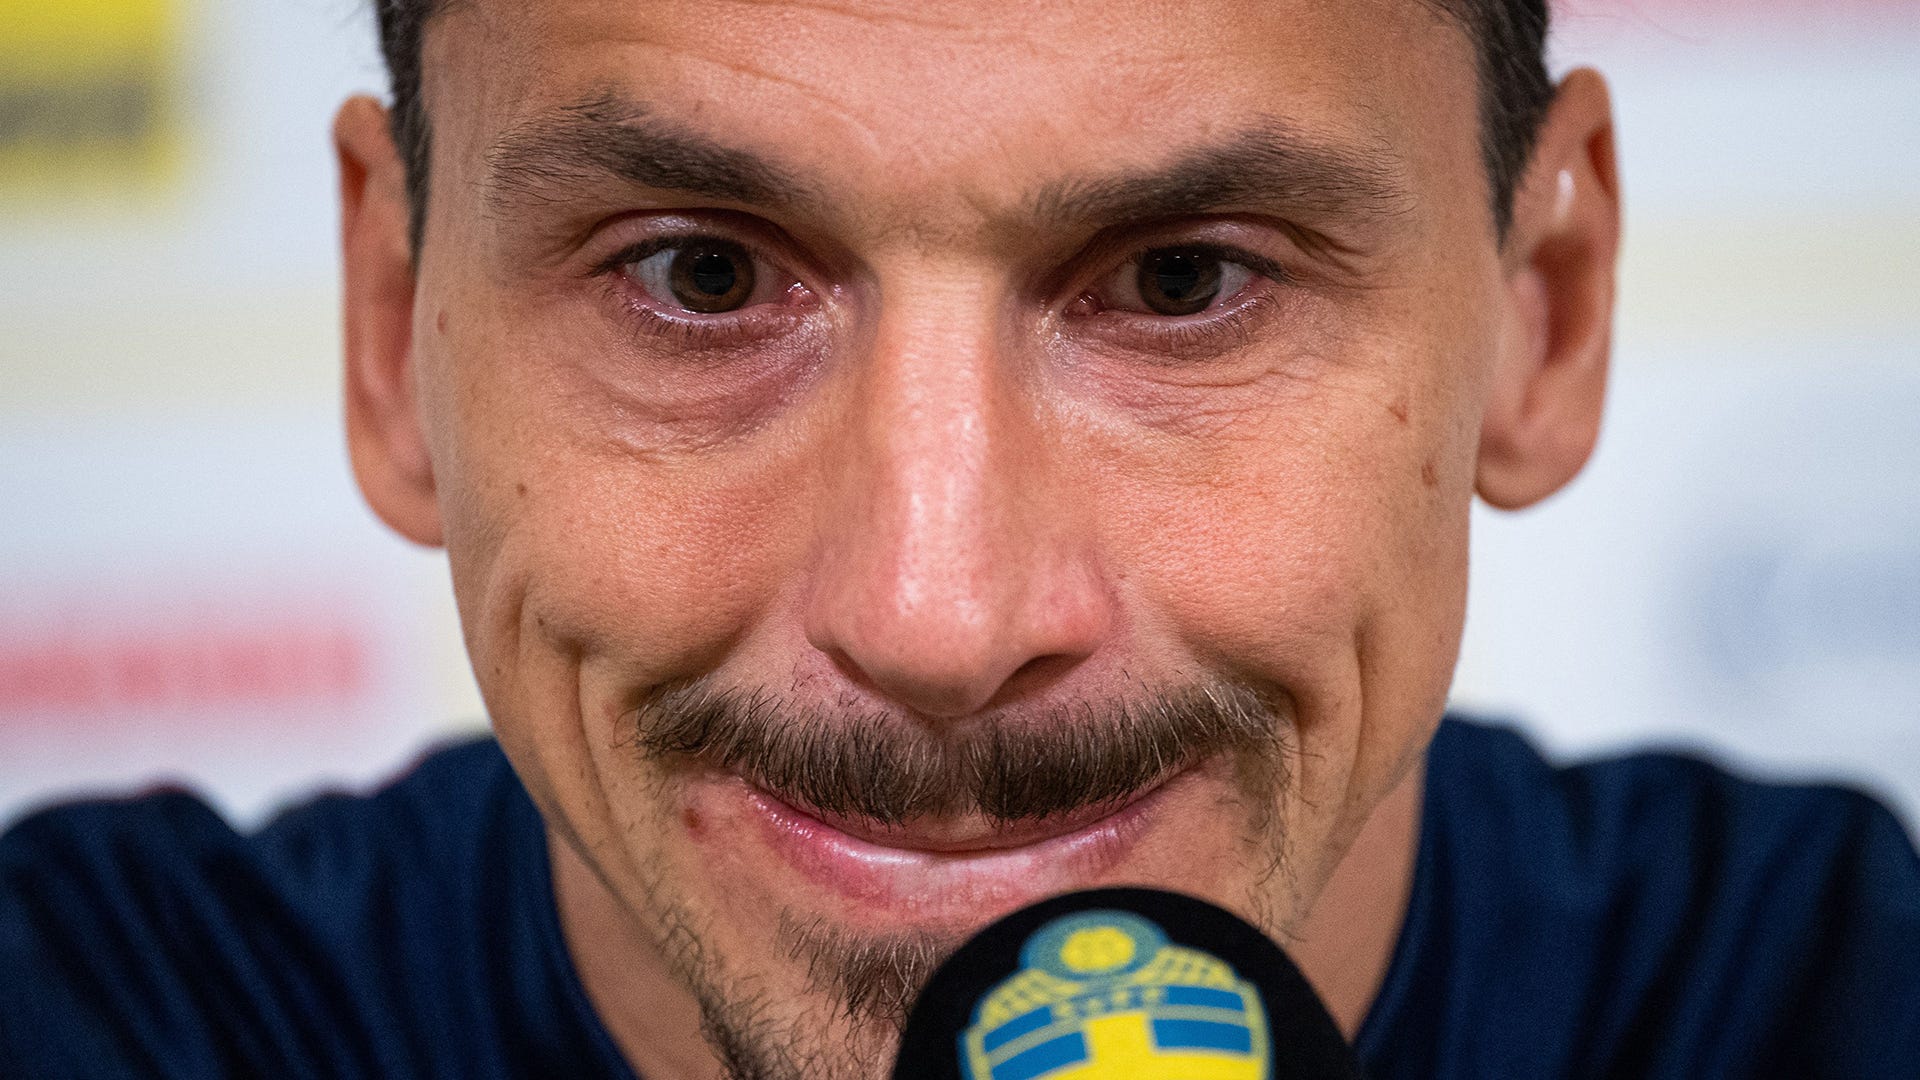 From the Arsenal 'audition' to Guardiola's 'bullsh*t' - Zlatan Ibrahimovic's  most colourful and controversial quotes  UK